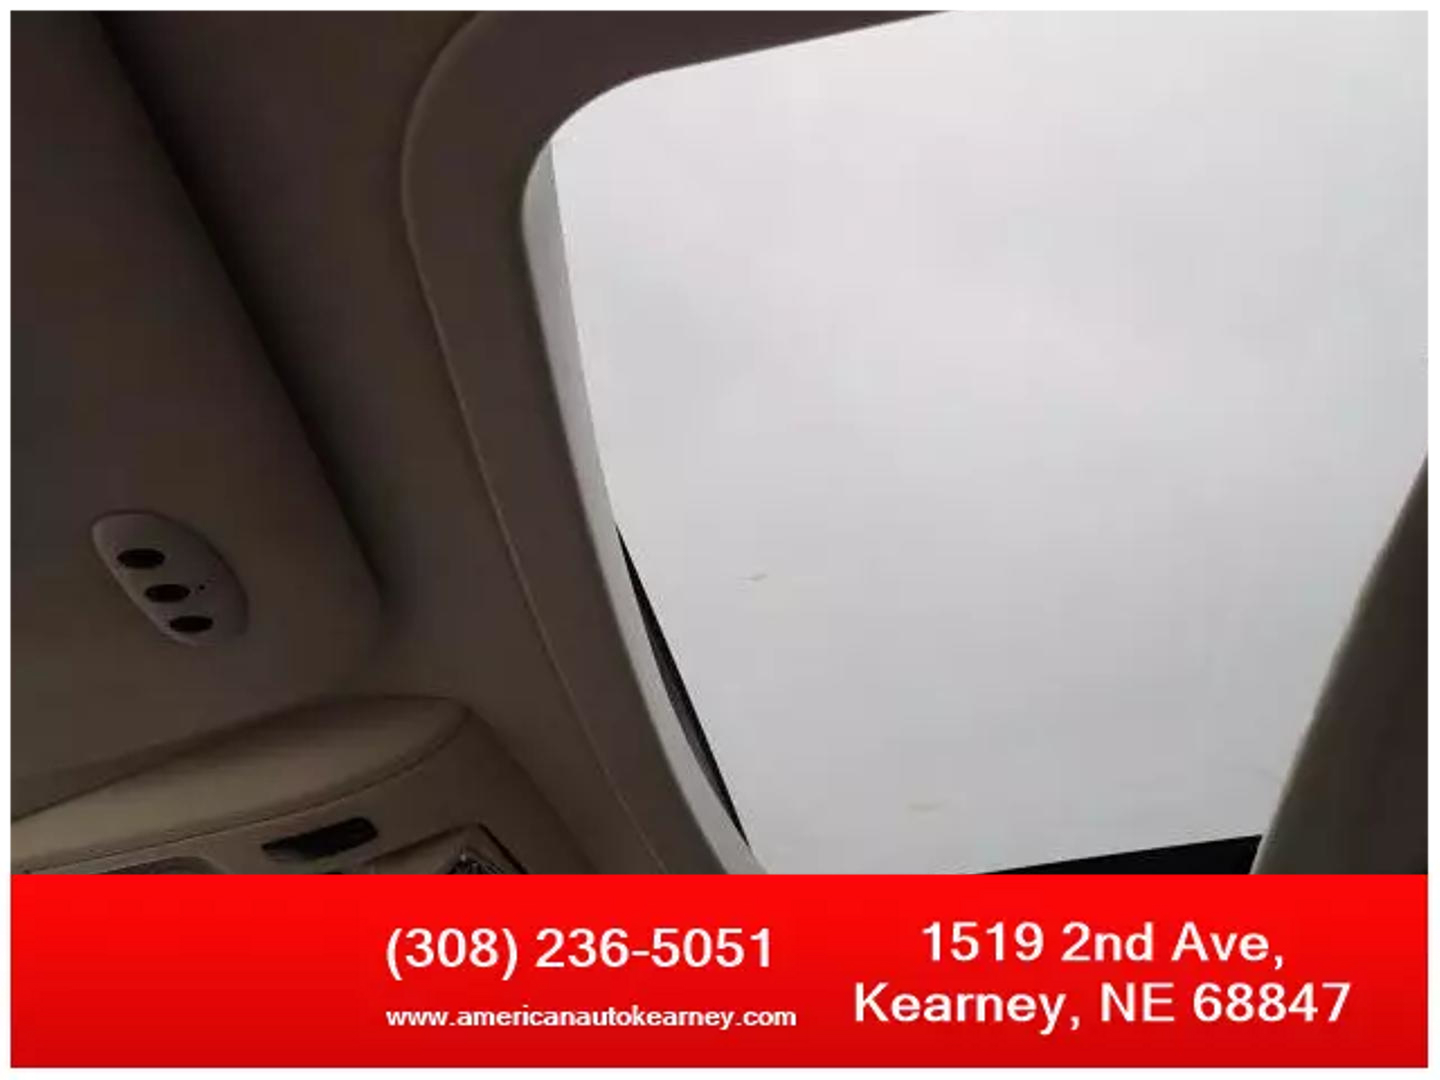 USED CHRYSLER TOWN & COUNTRY 2008 for sale in Kearney, NE